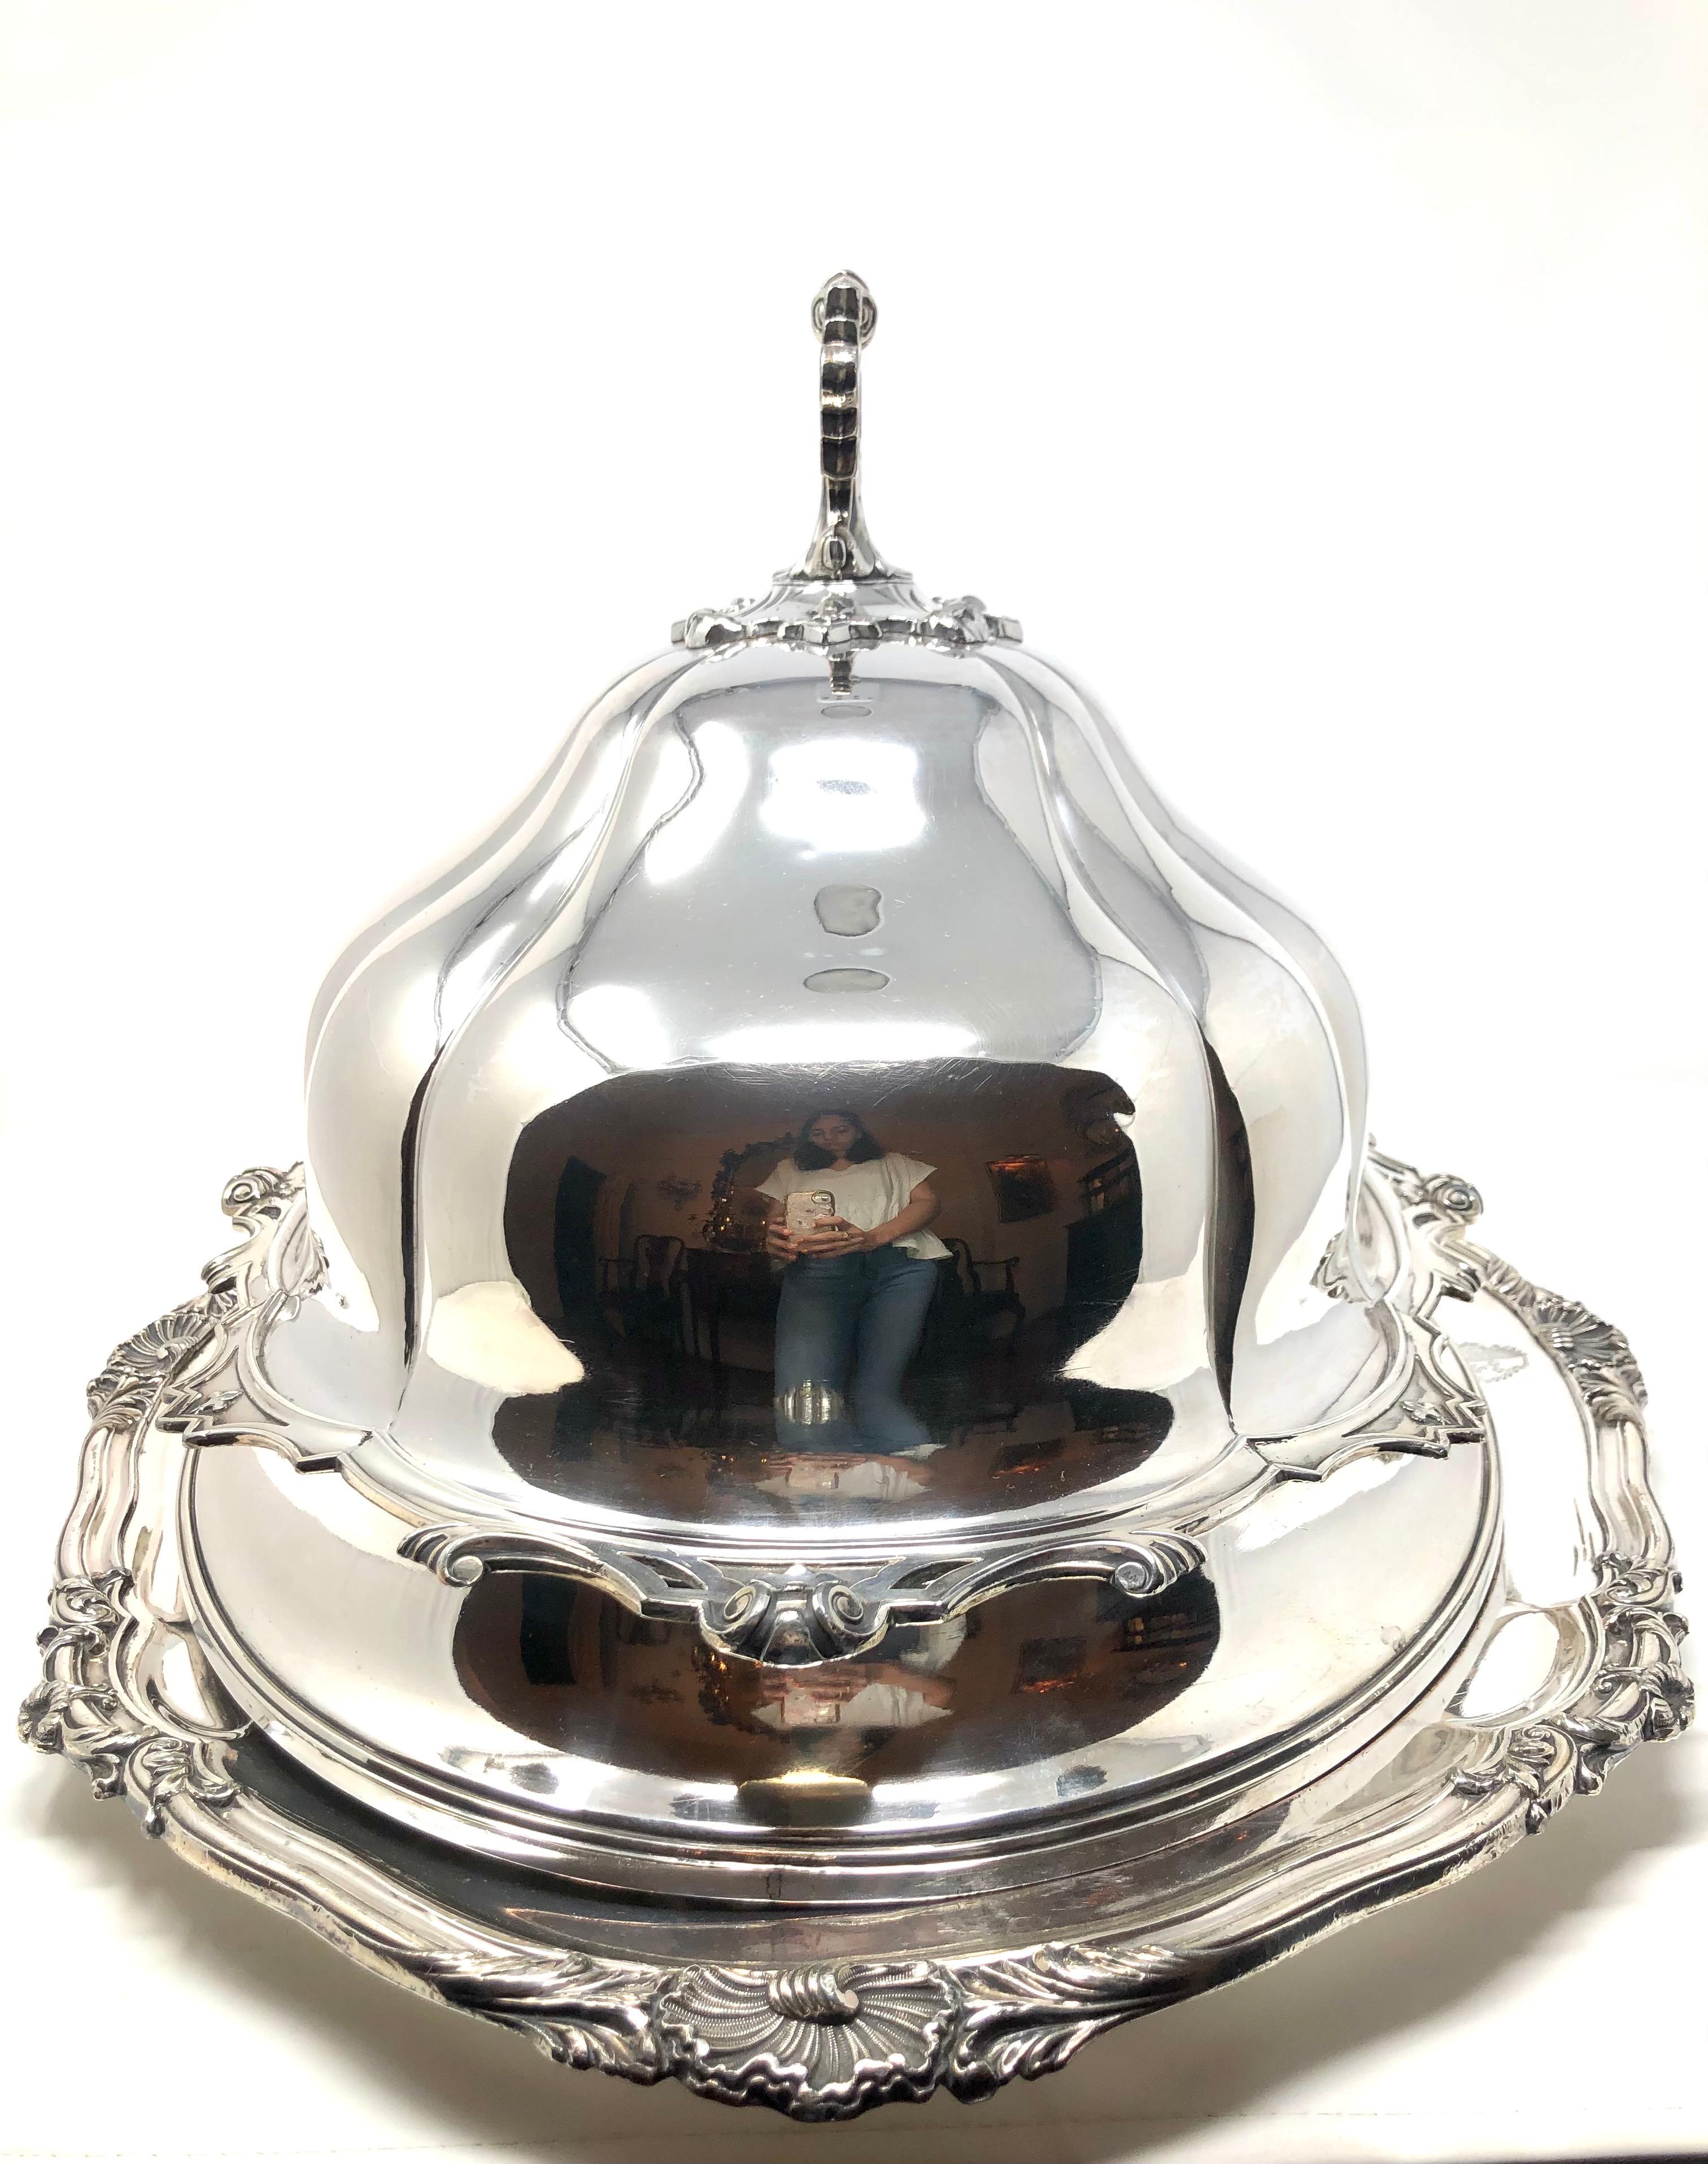 Antique Sheffield silver-plate (silver on copper) meat dome and tray, Circa 1840-1850.